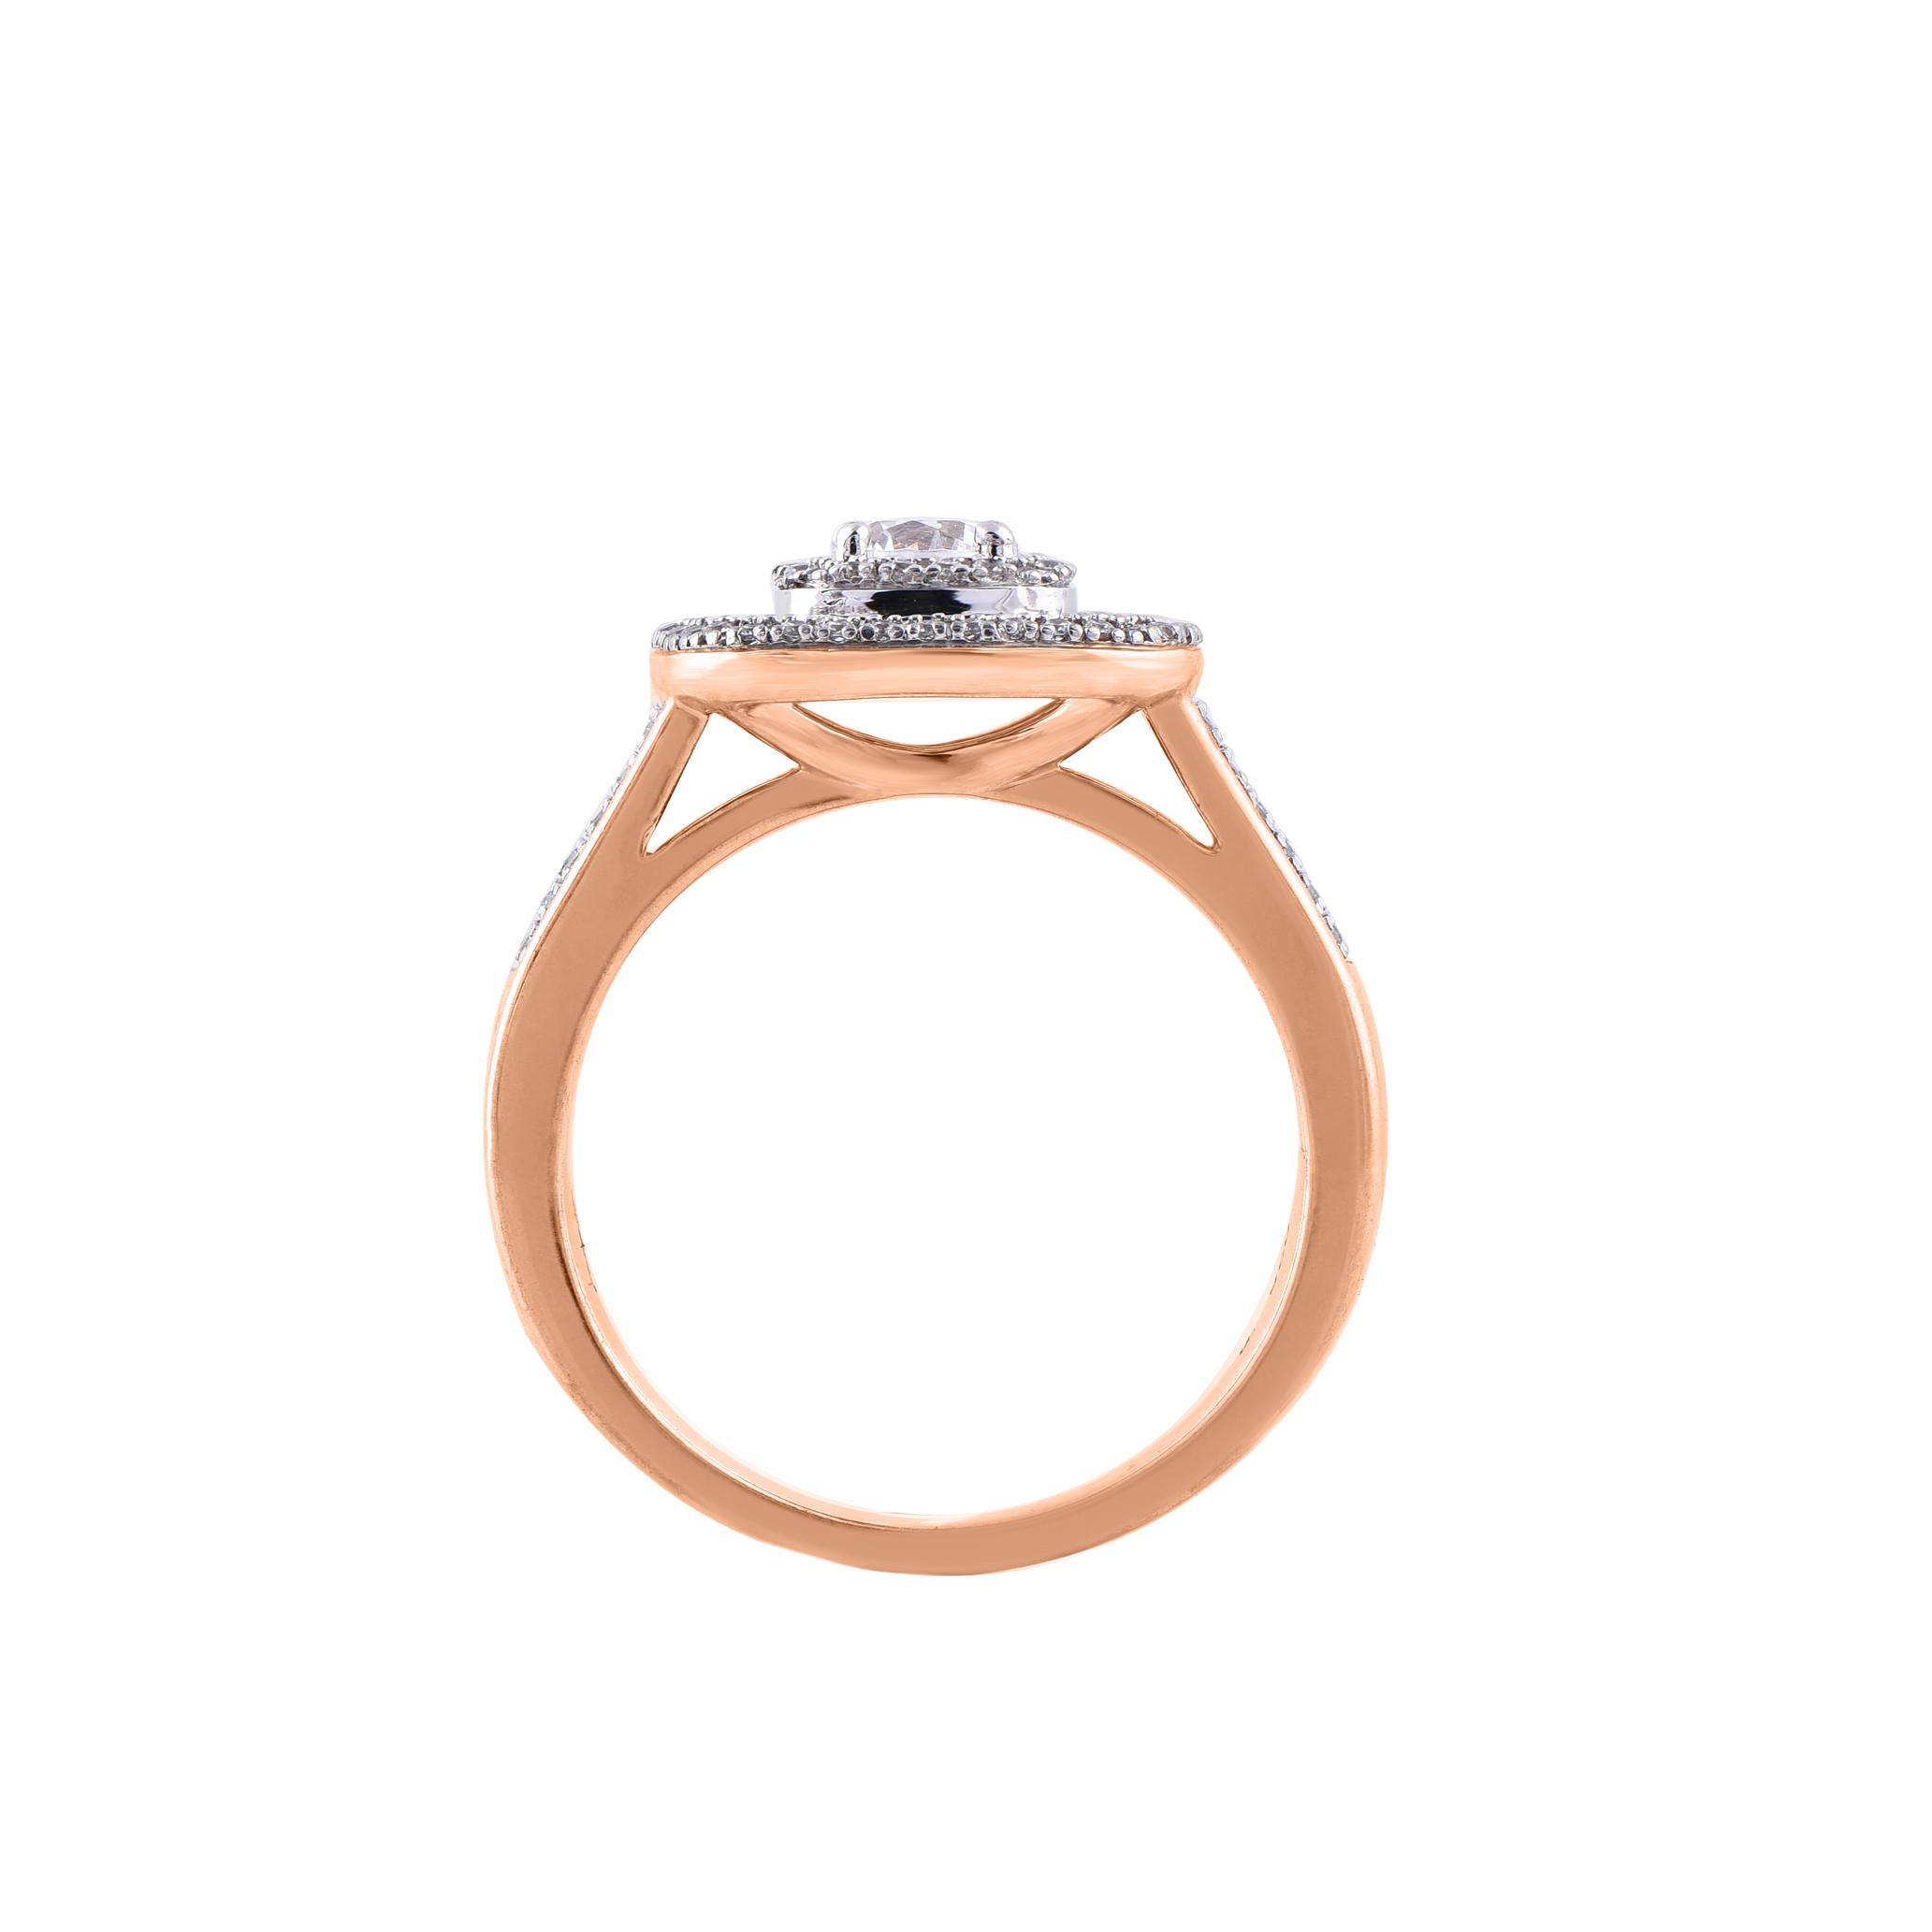 TJD 1.0 Carat Round Diamond 14KT Rose Gold Cushion Frame Cluster Engagement Ring In New Condition For Sale In New York, NY